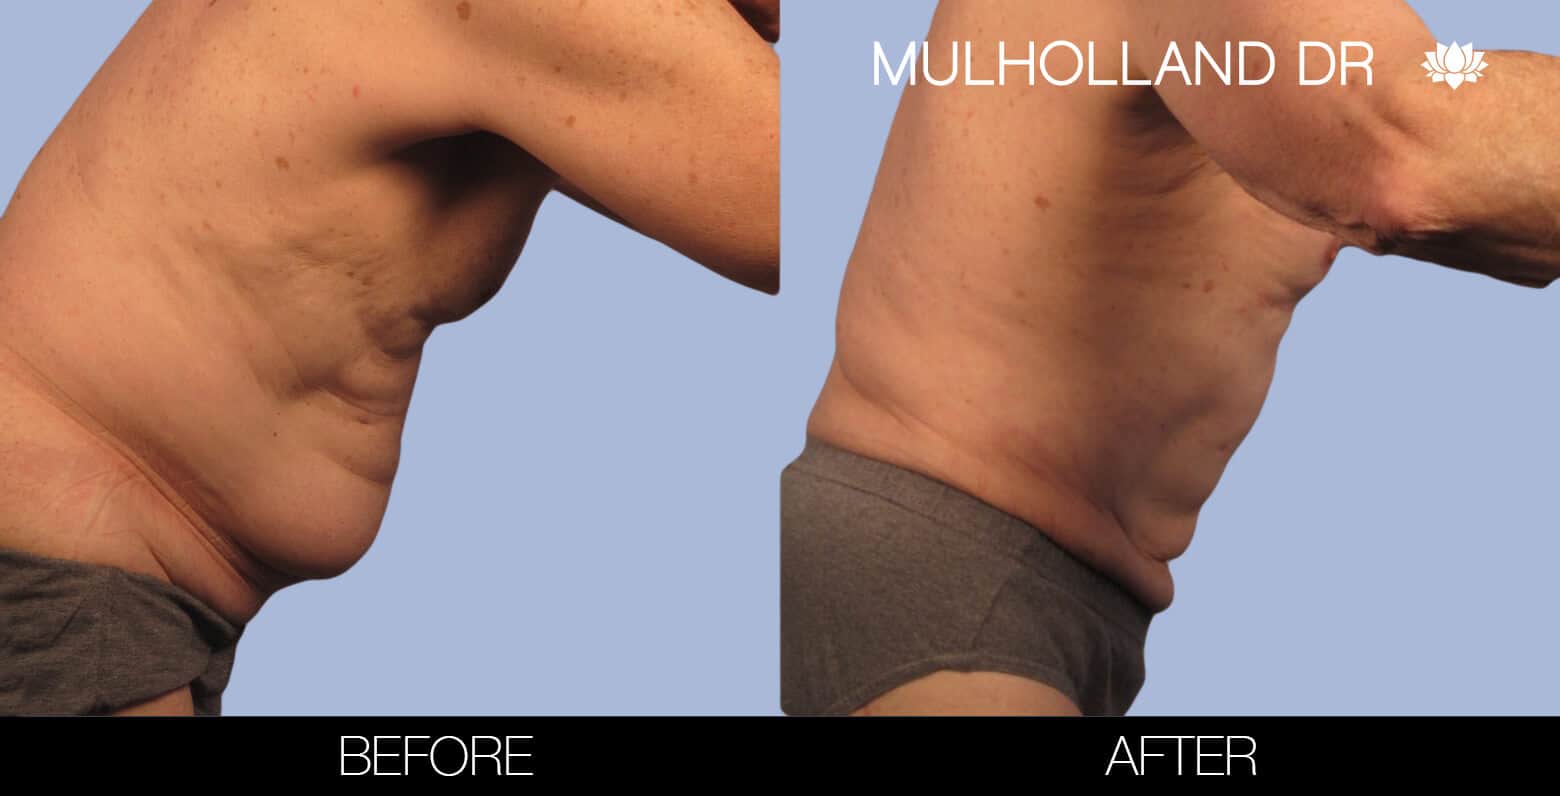 Male Tummy Tuck - Before and After Photos